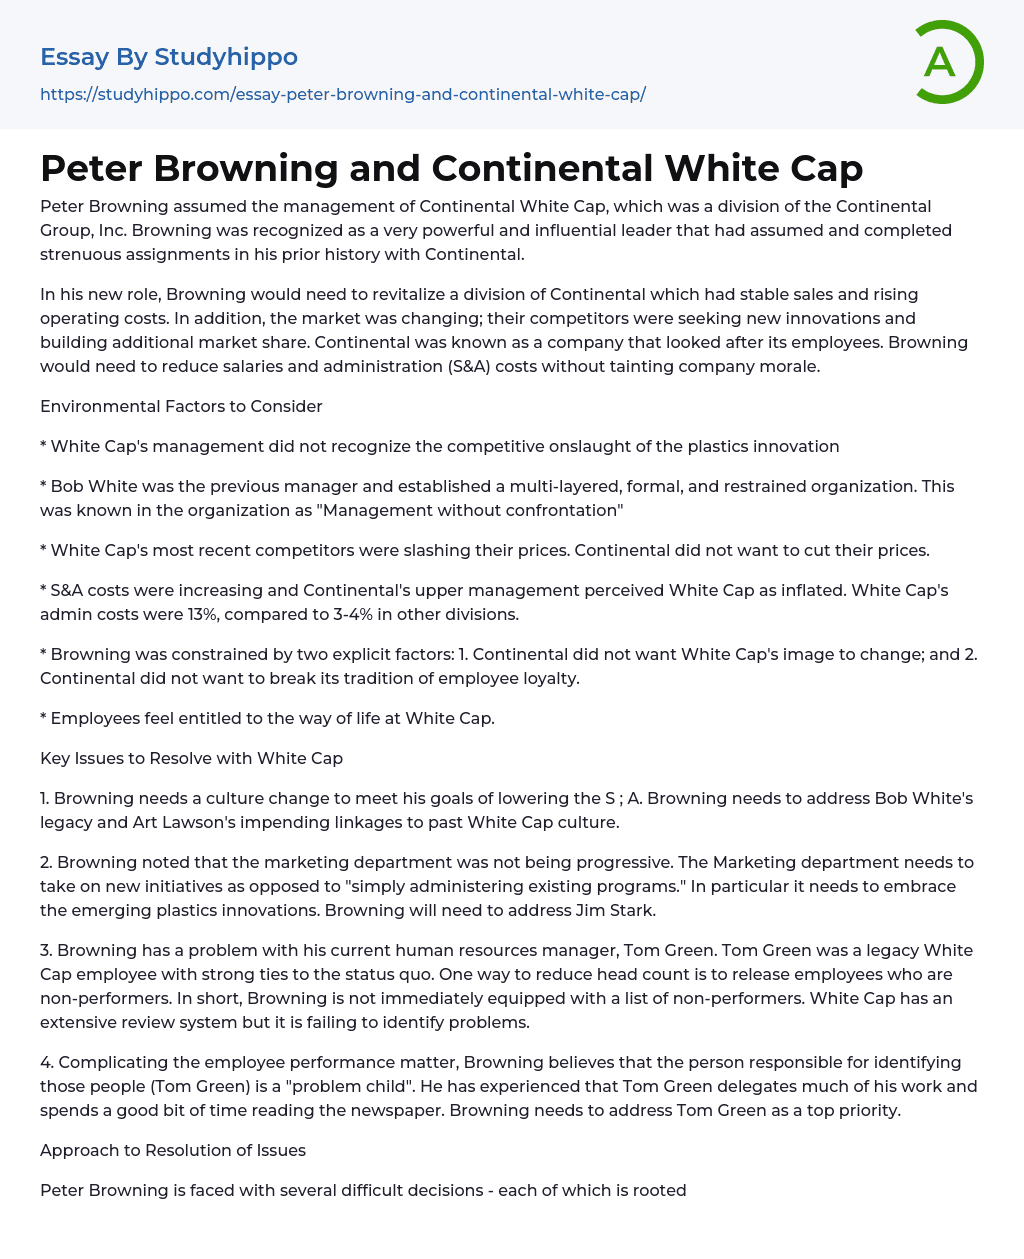 Peter Browning and Continental White Cap Essay Example